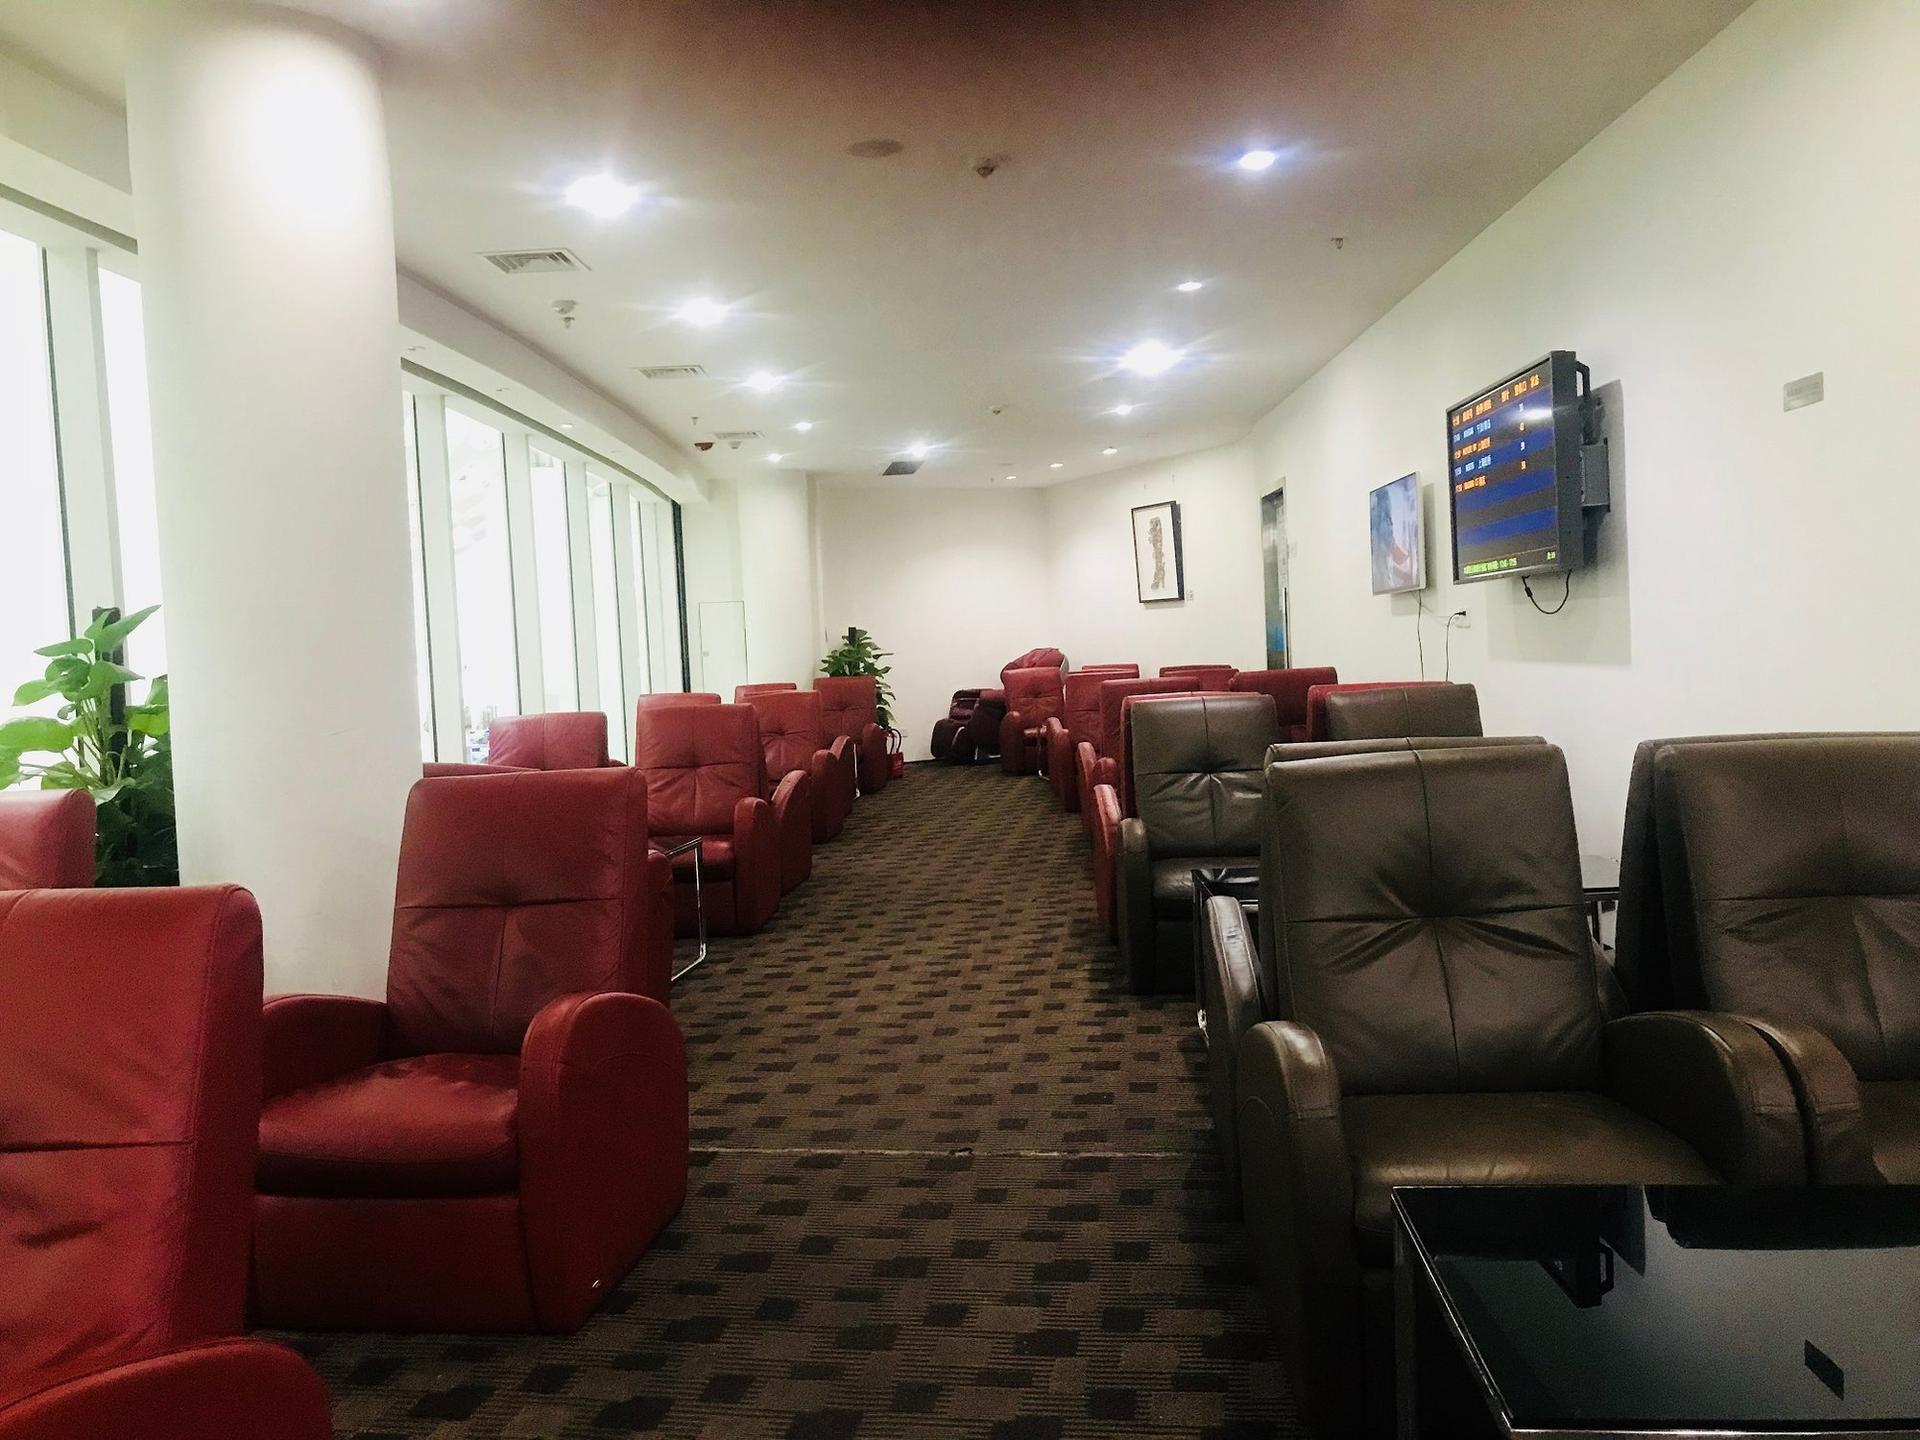 Shenzhen Airport First & Business Class Lounge (Joyee 1) (Closed For Renovation - Temporary Location Available) image 4 of 8